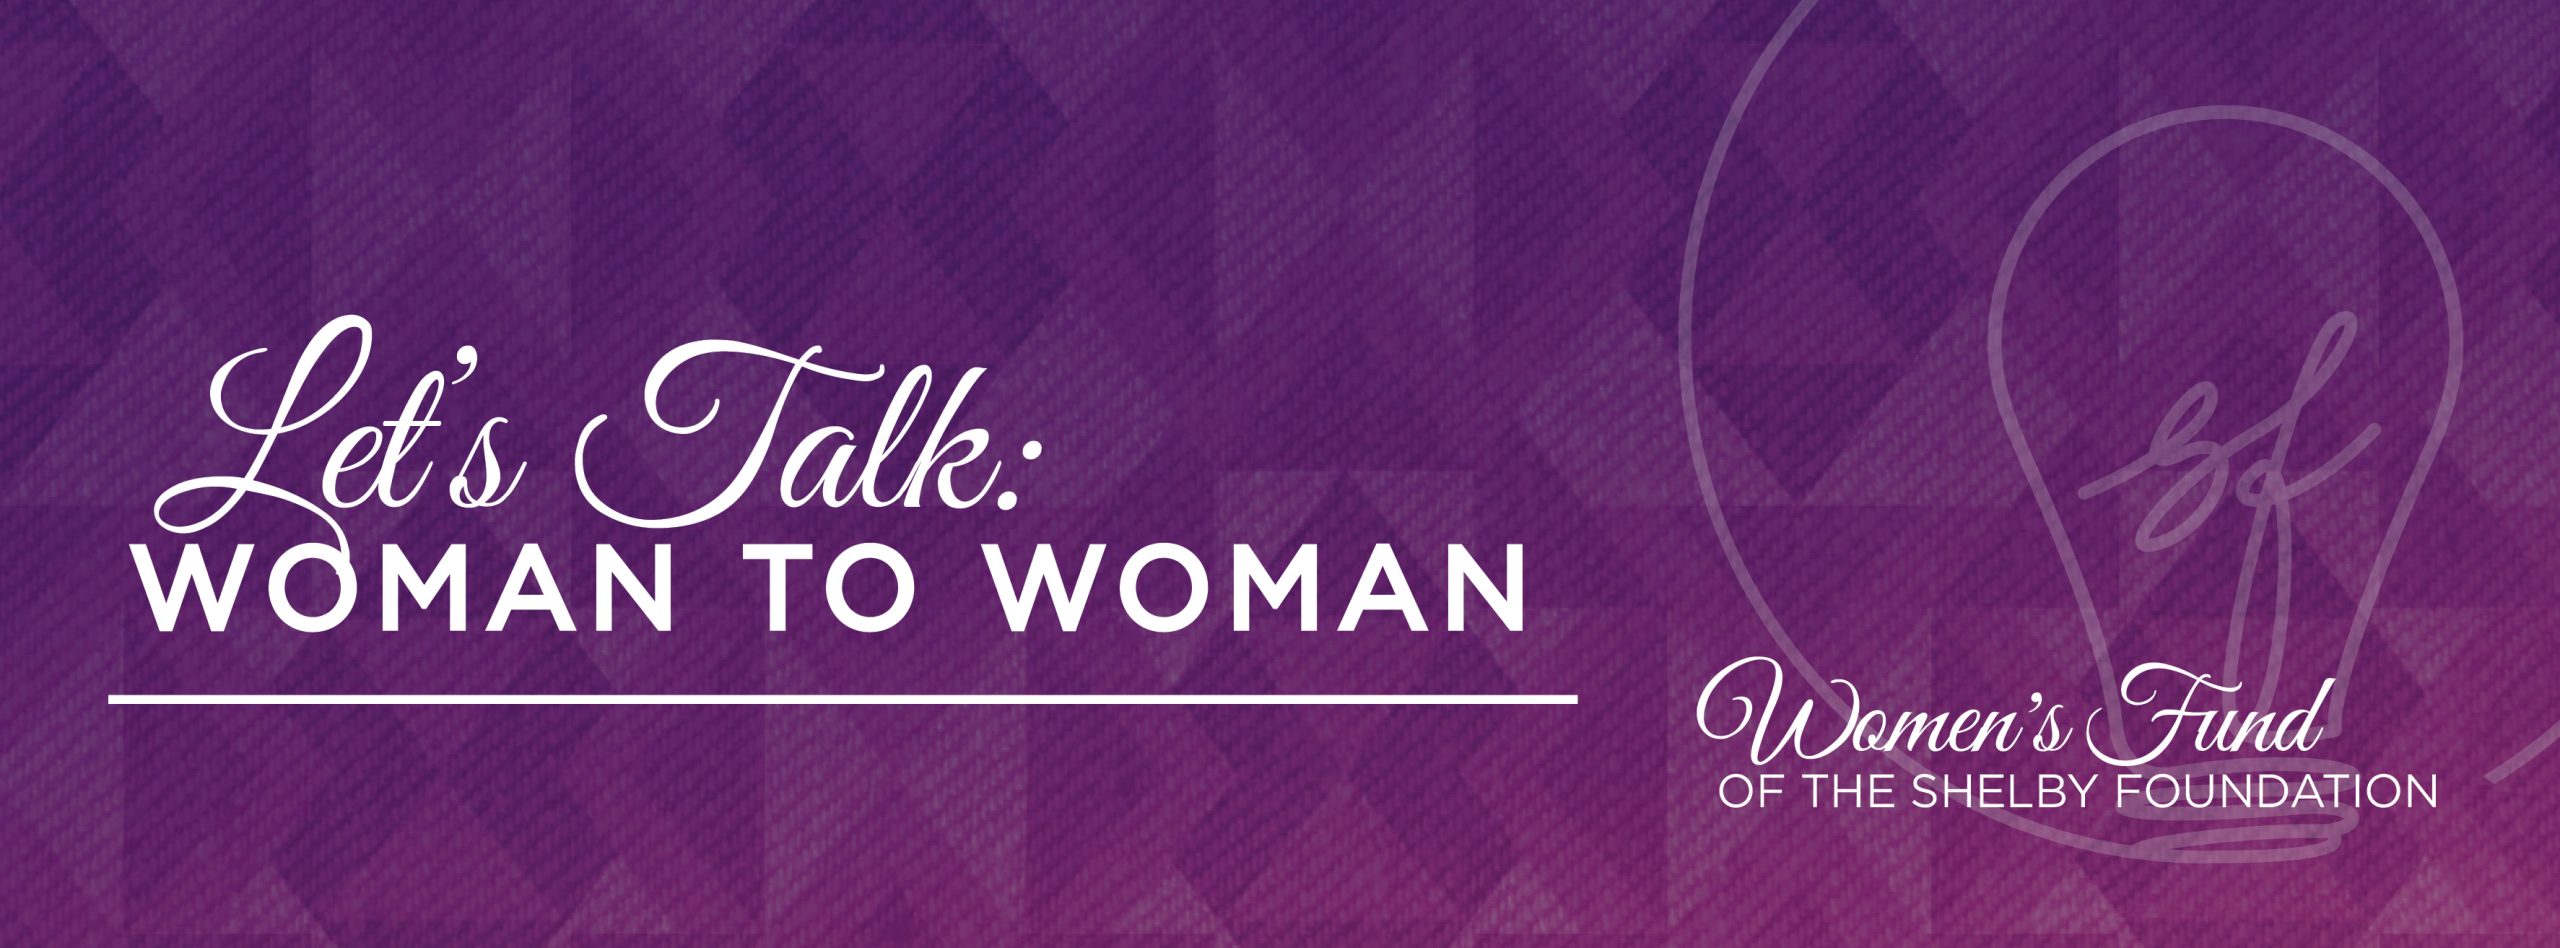 Let's Talk: Woman to Woman - Getting to Know your Nonprofit Leaders